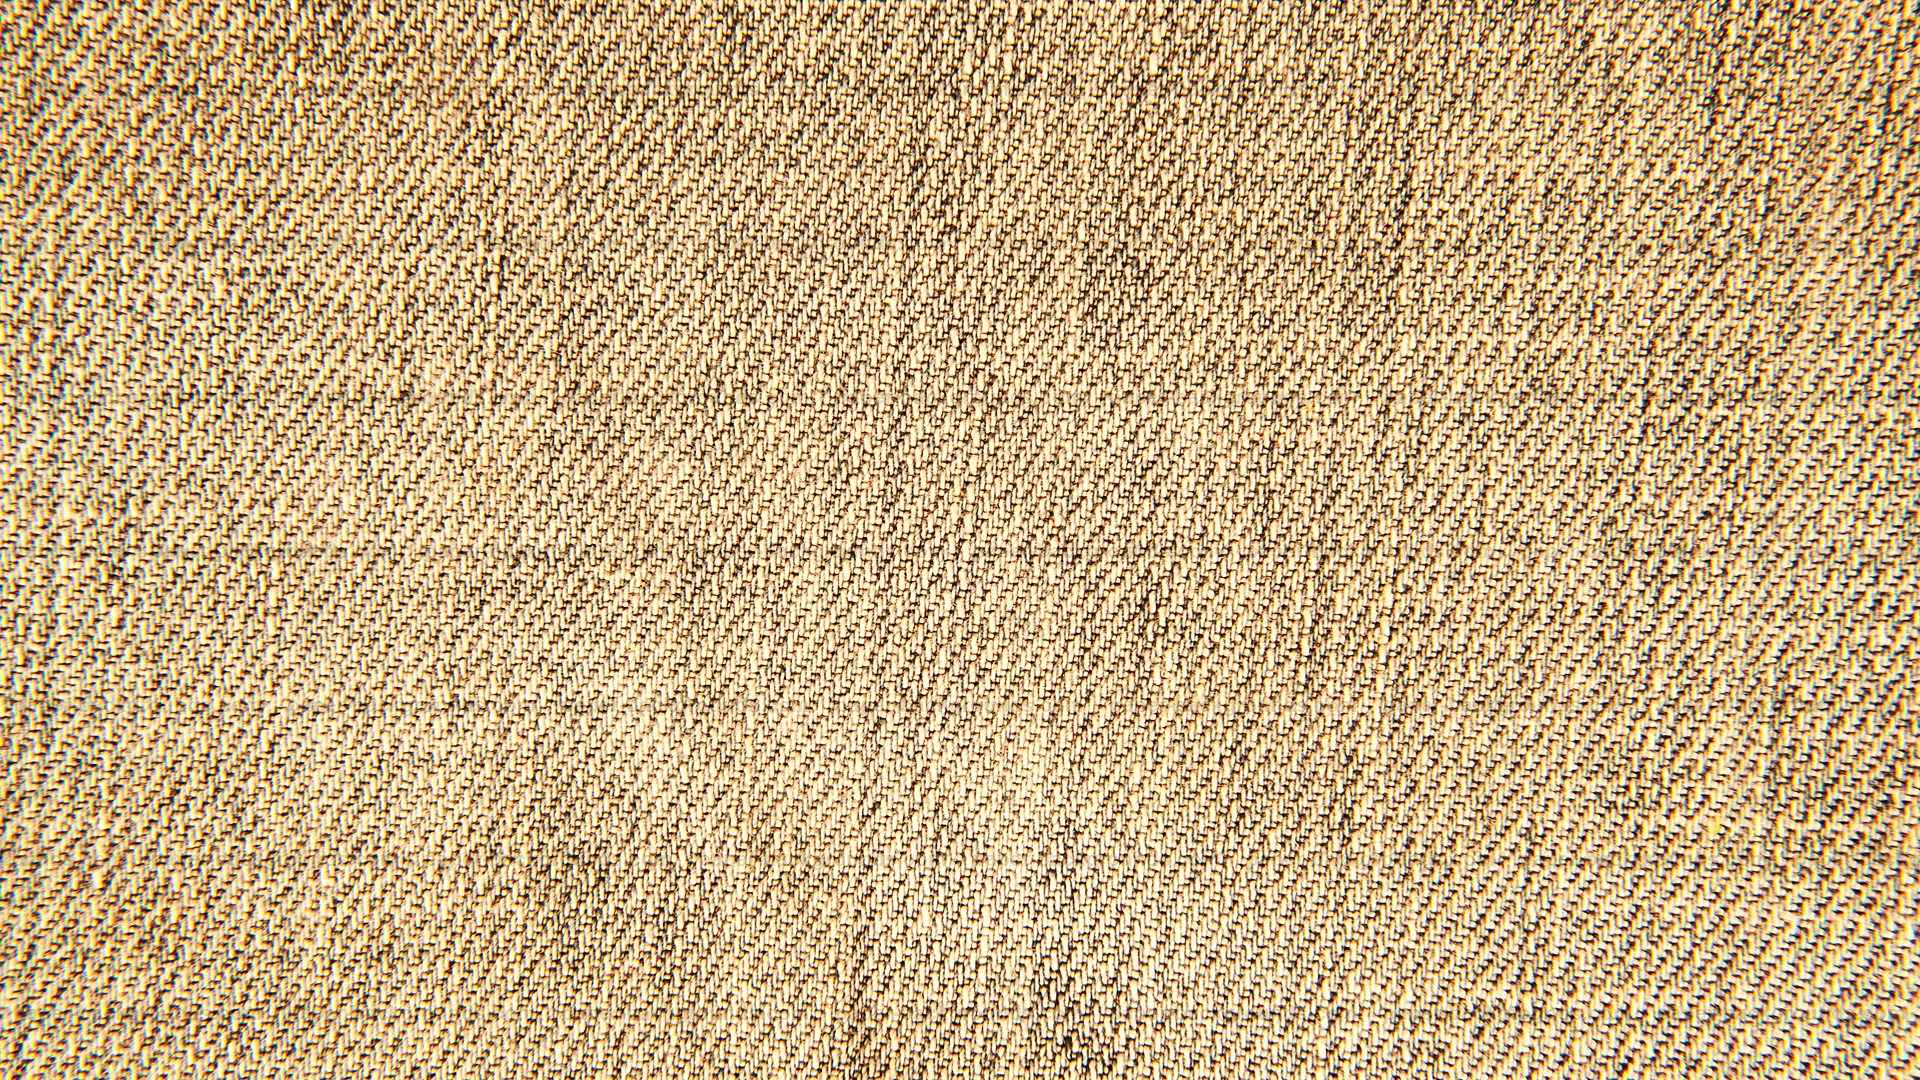 Material Fabric Background Texture Wallpapers - Woven Fabric - HD Wallpaper 